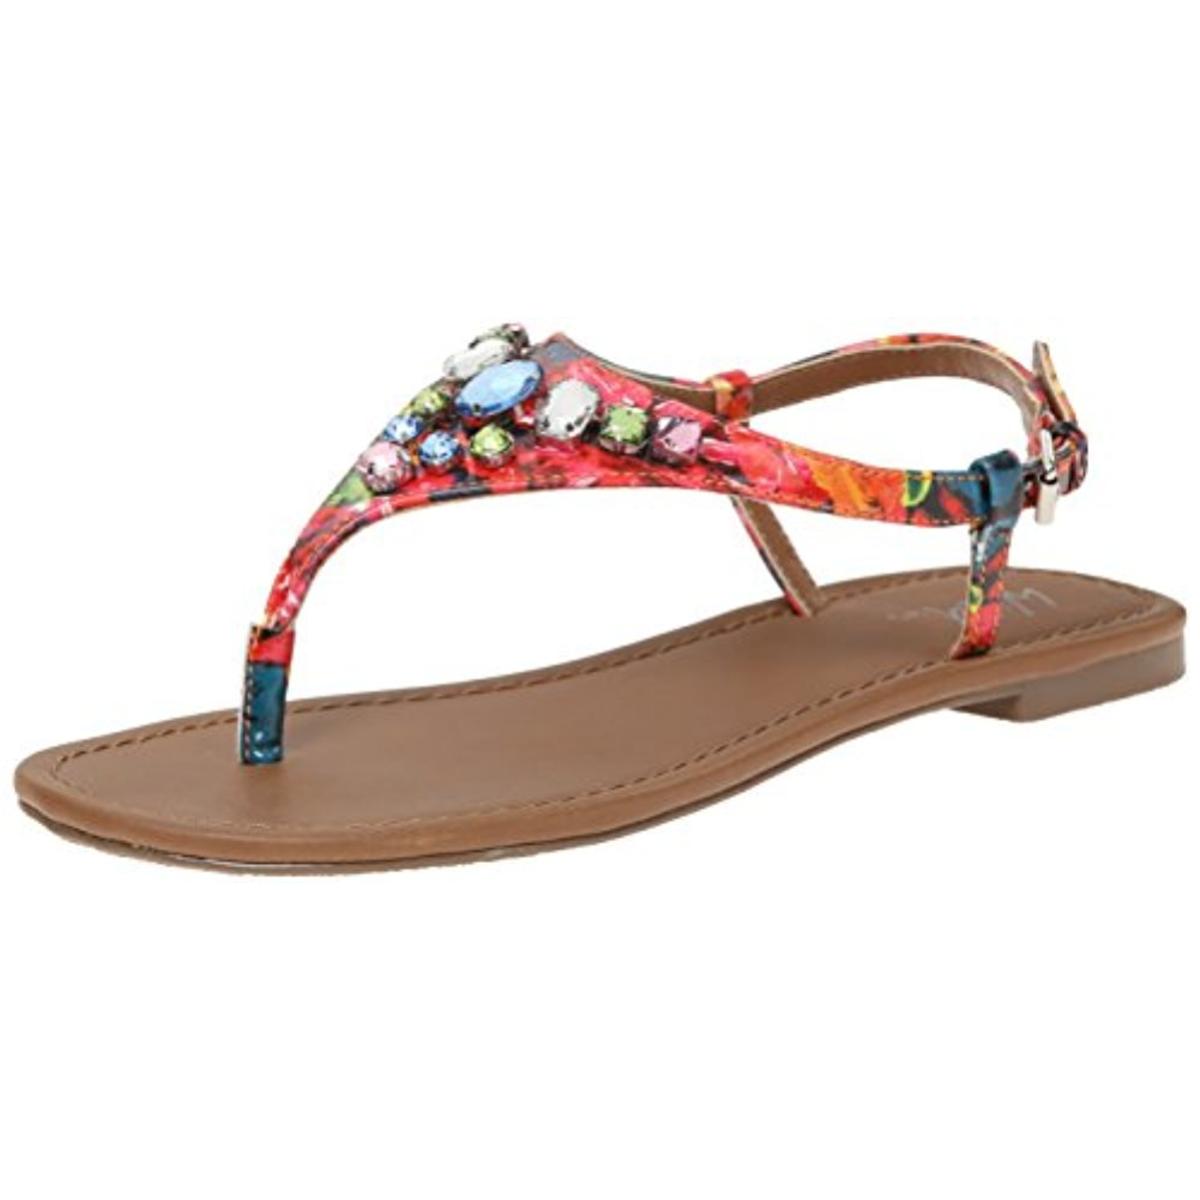 Wild Pair 8205 Womens Frazier Faux Leather T-Strap Thong Sandals Shoes BHFO